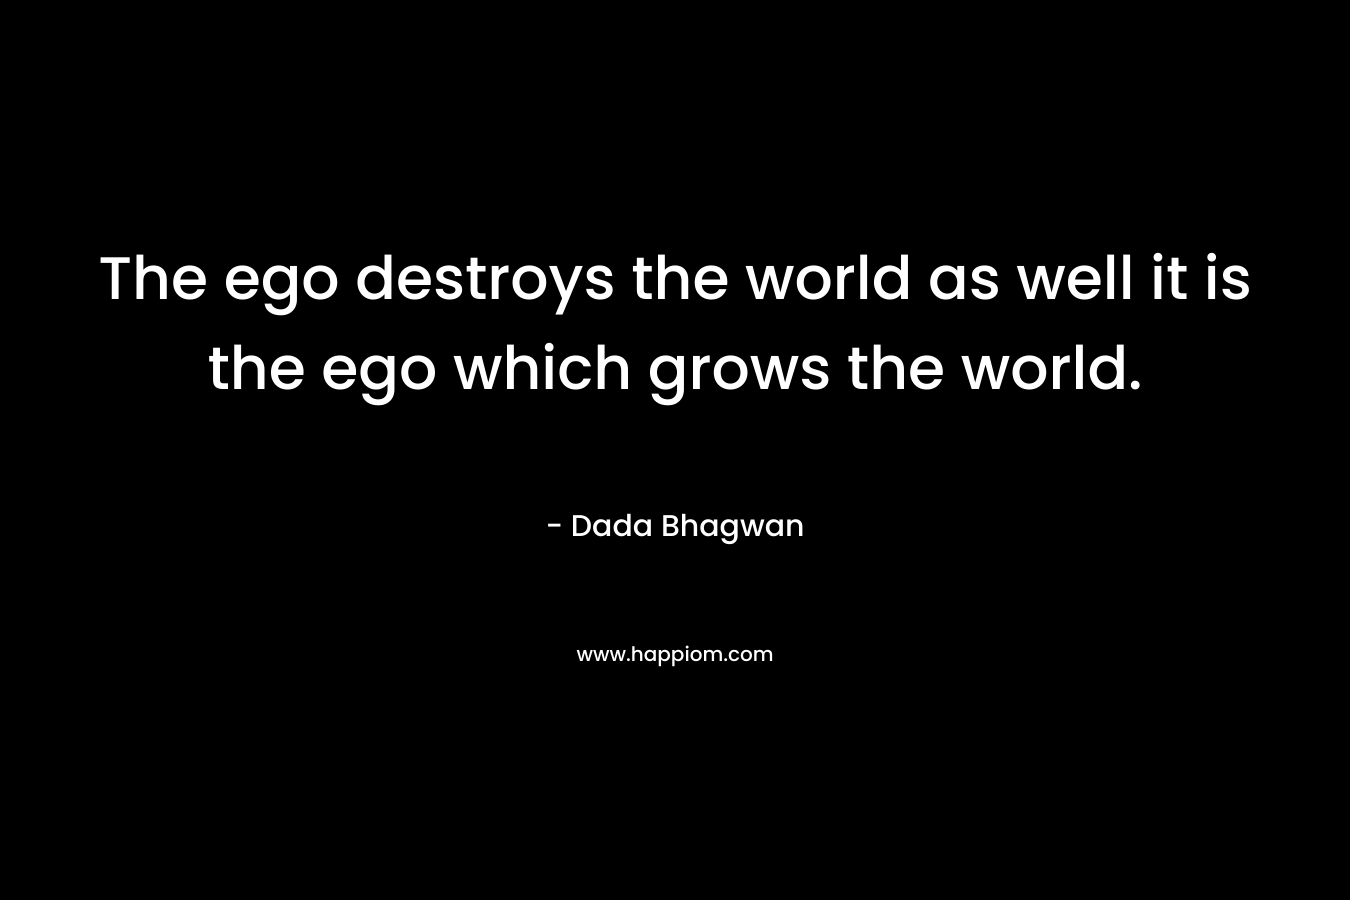 The ego destroys the world as well it is the ego which grows the world.